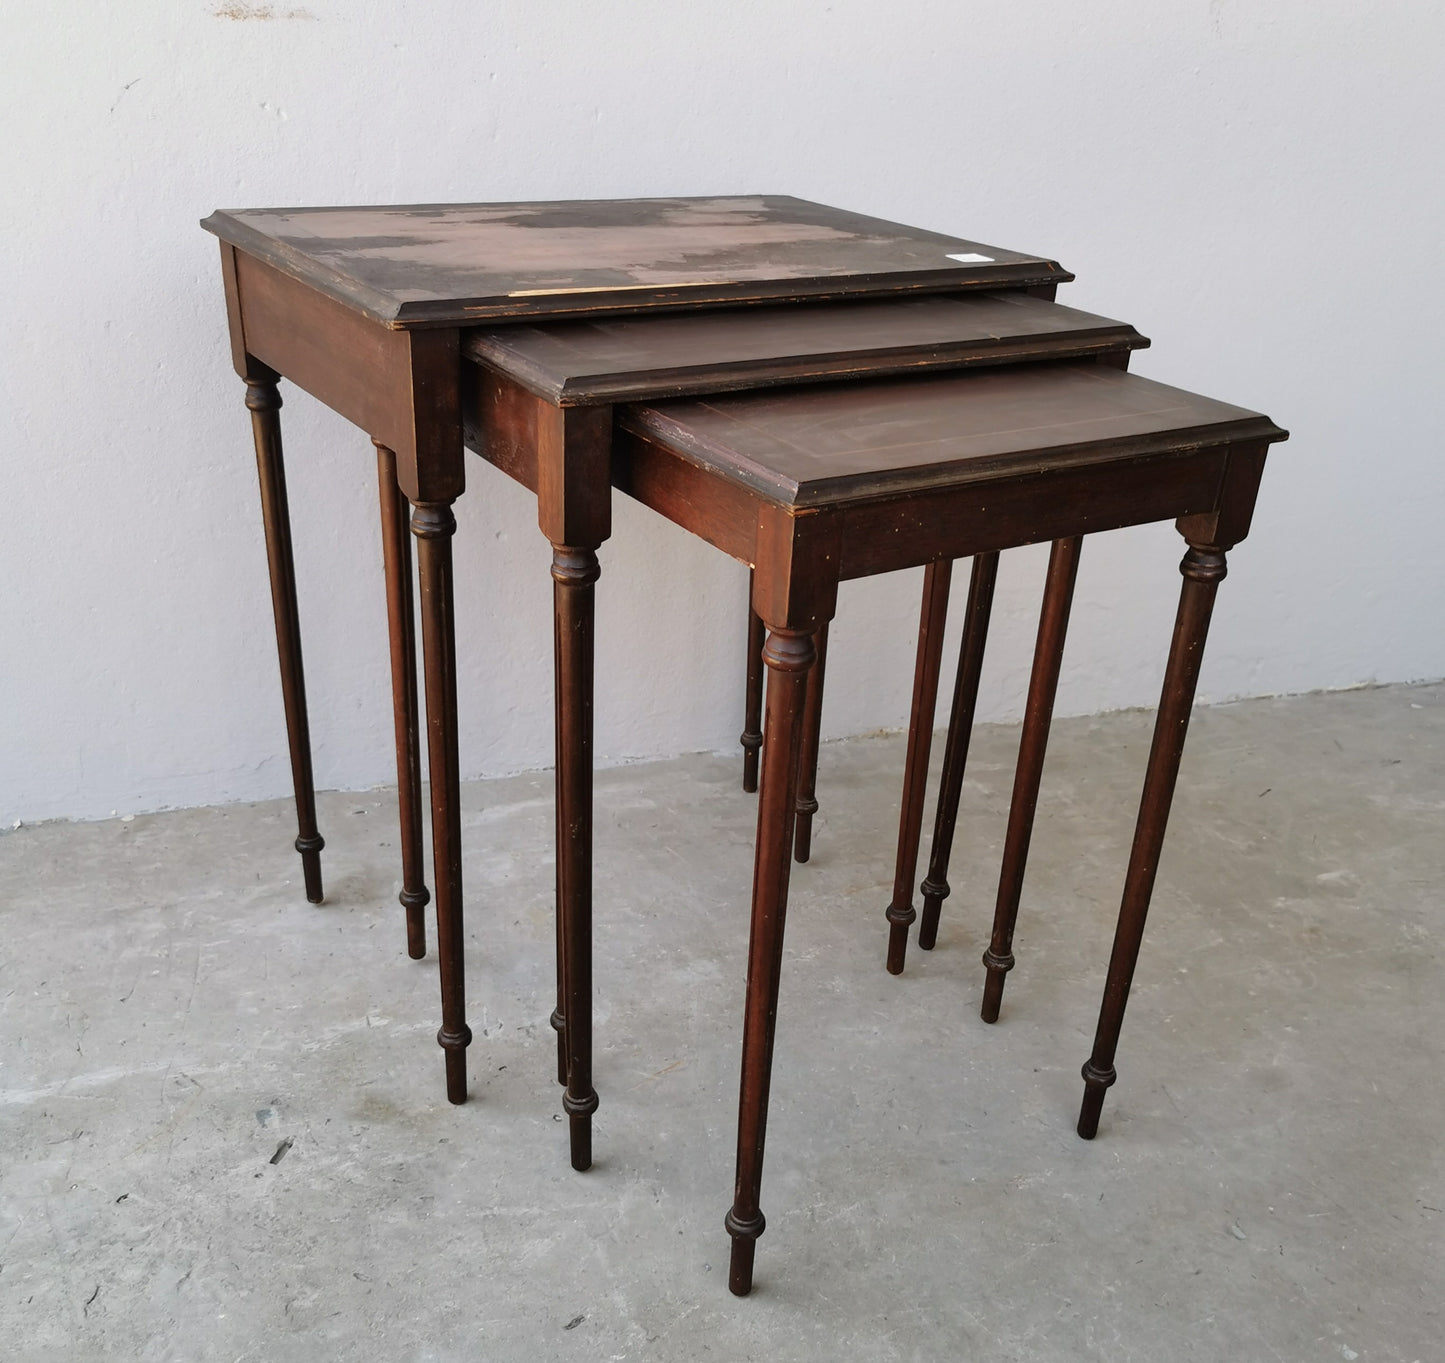 Antique nest of tables